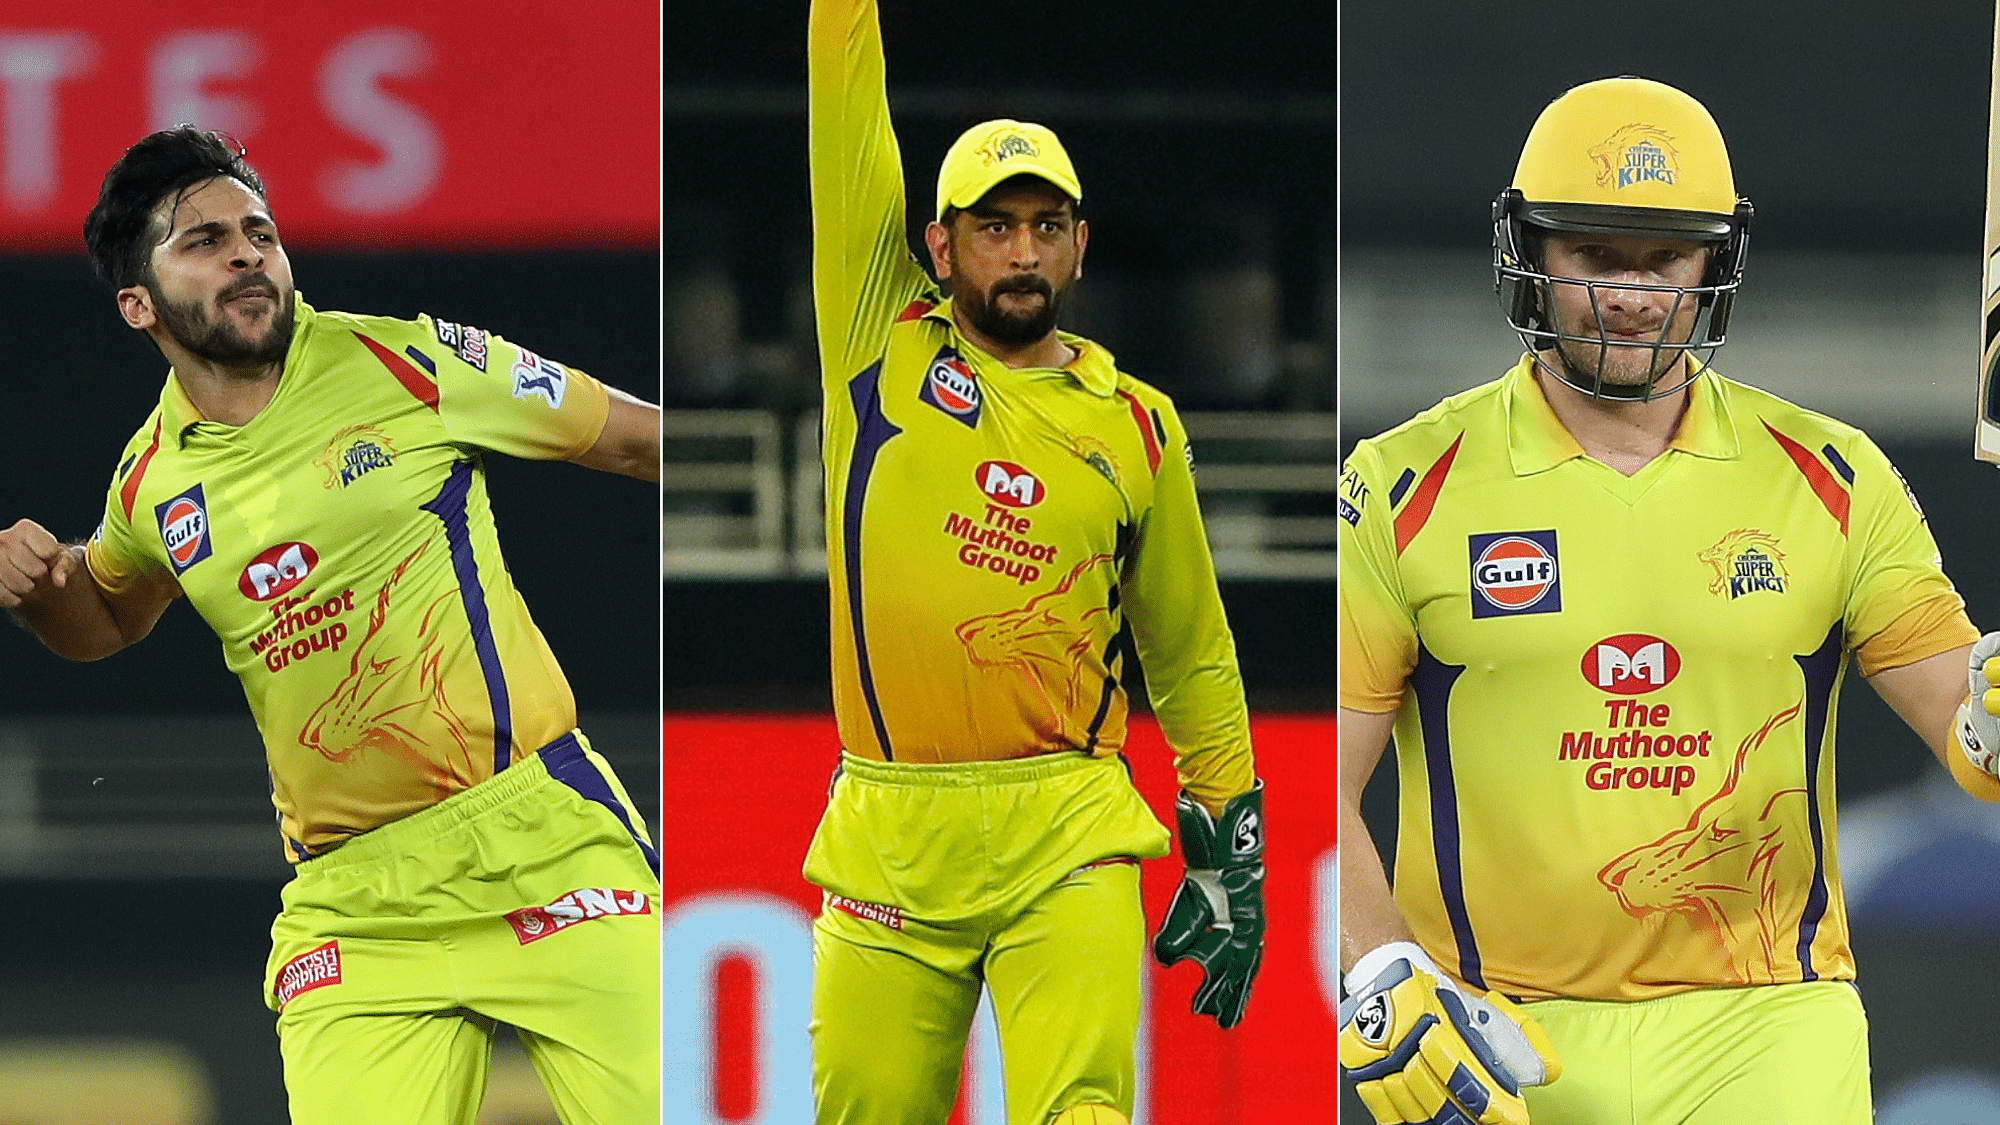 Chennai Super Kings end their three-match losing streak with a win over Kings XI Punjab.